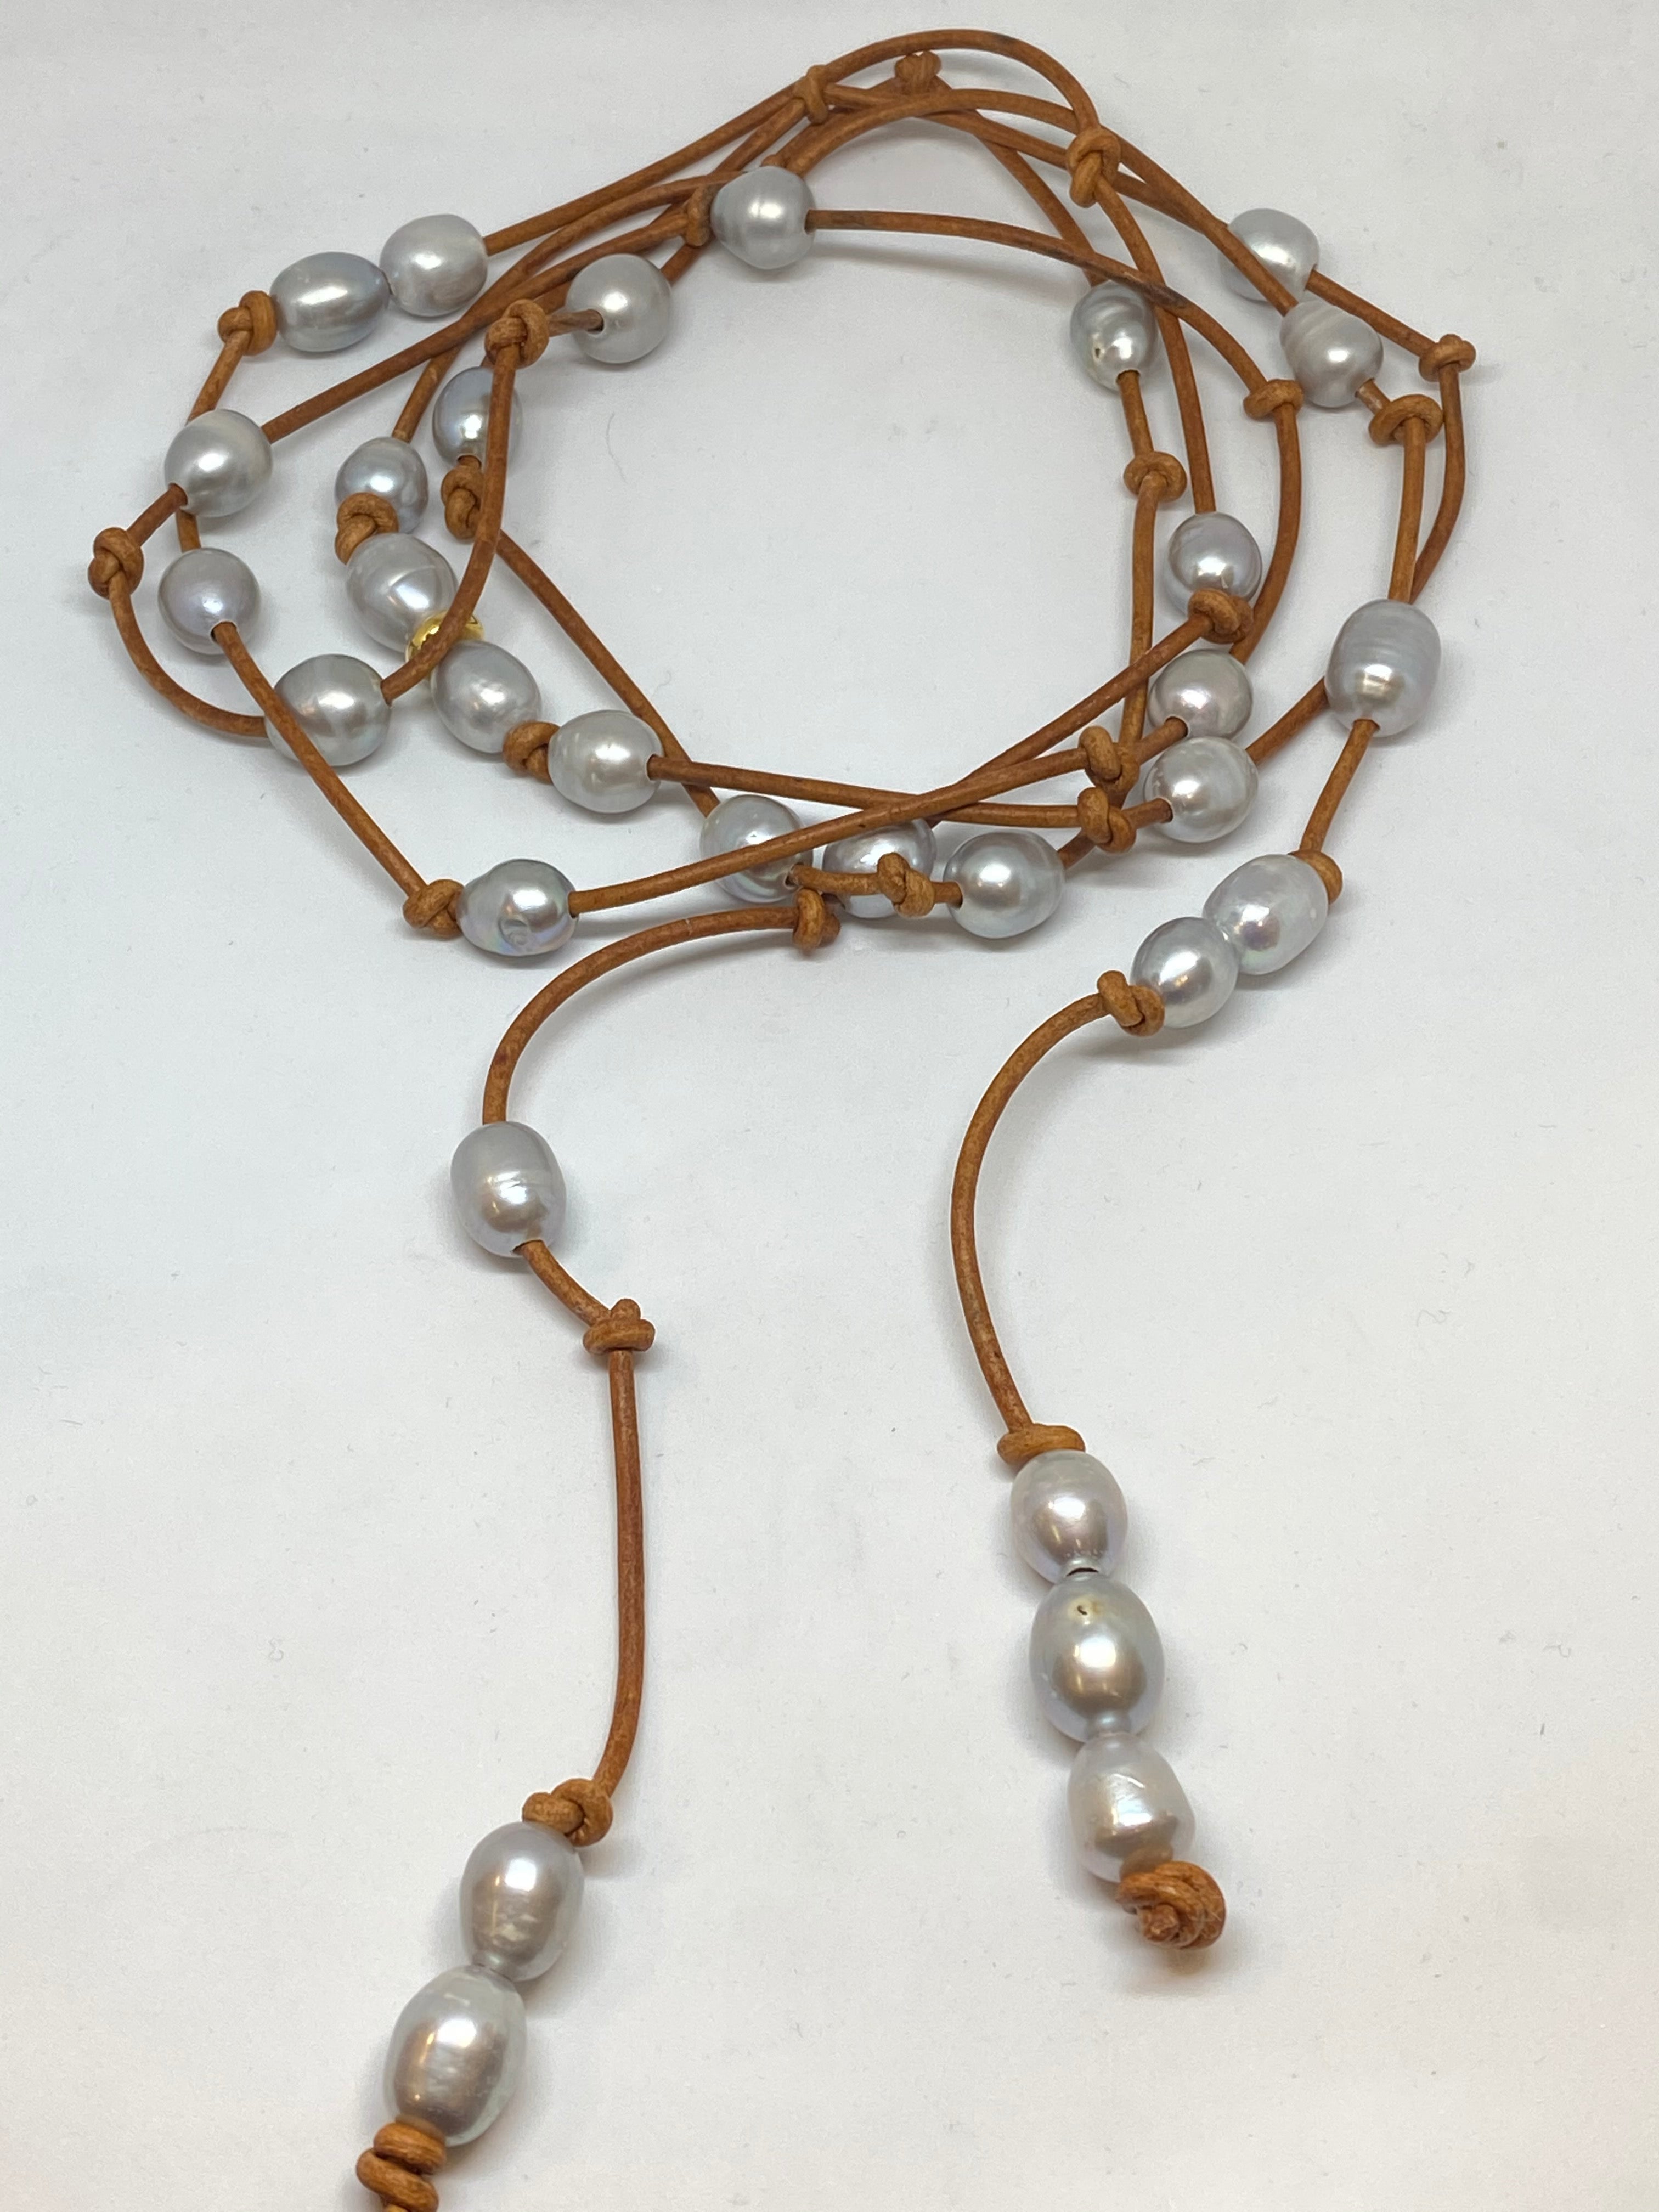 Grey Pearls on Leather Wrap Necklace